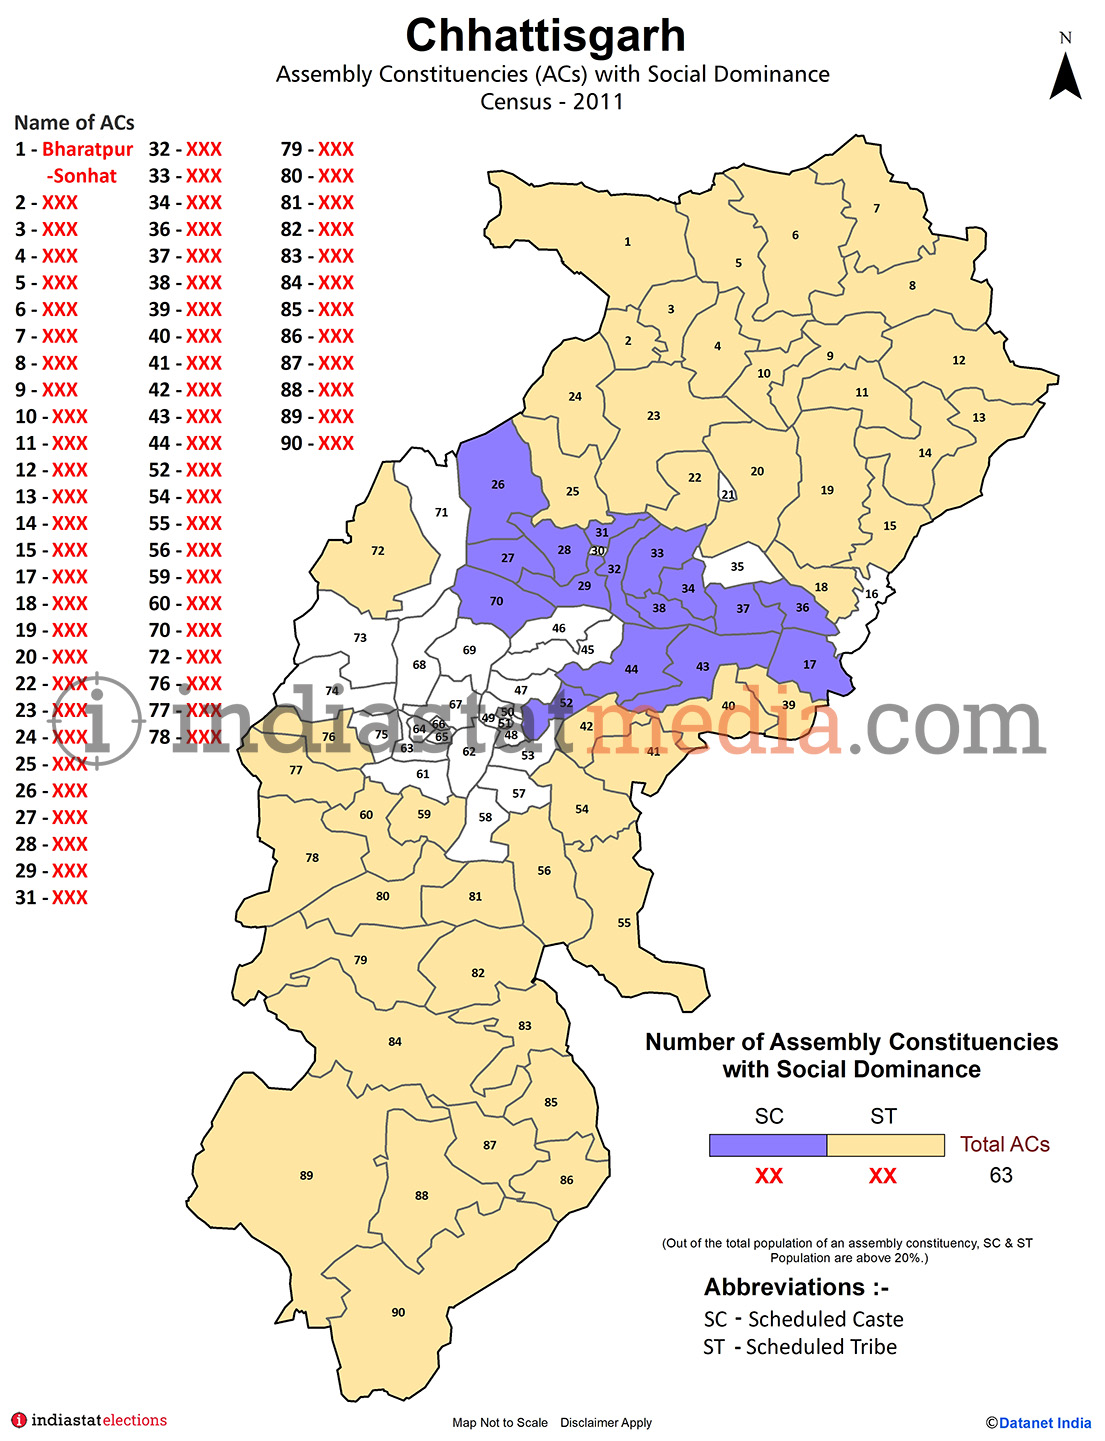 Assembly Constituencies with Social Dominance in Chhattisgarh - Census 2011